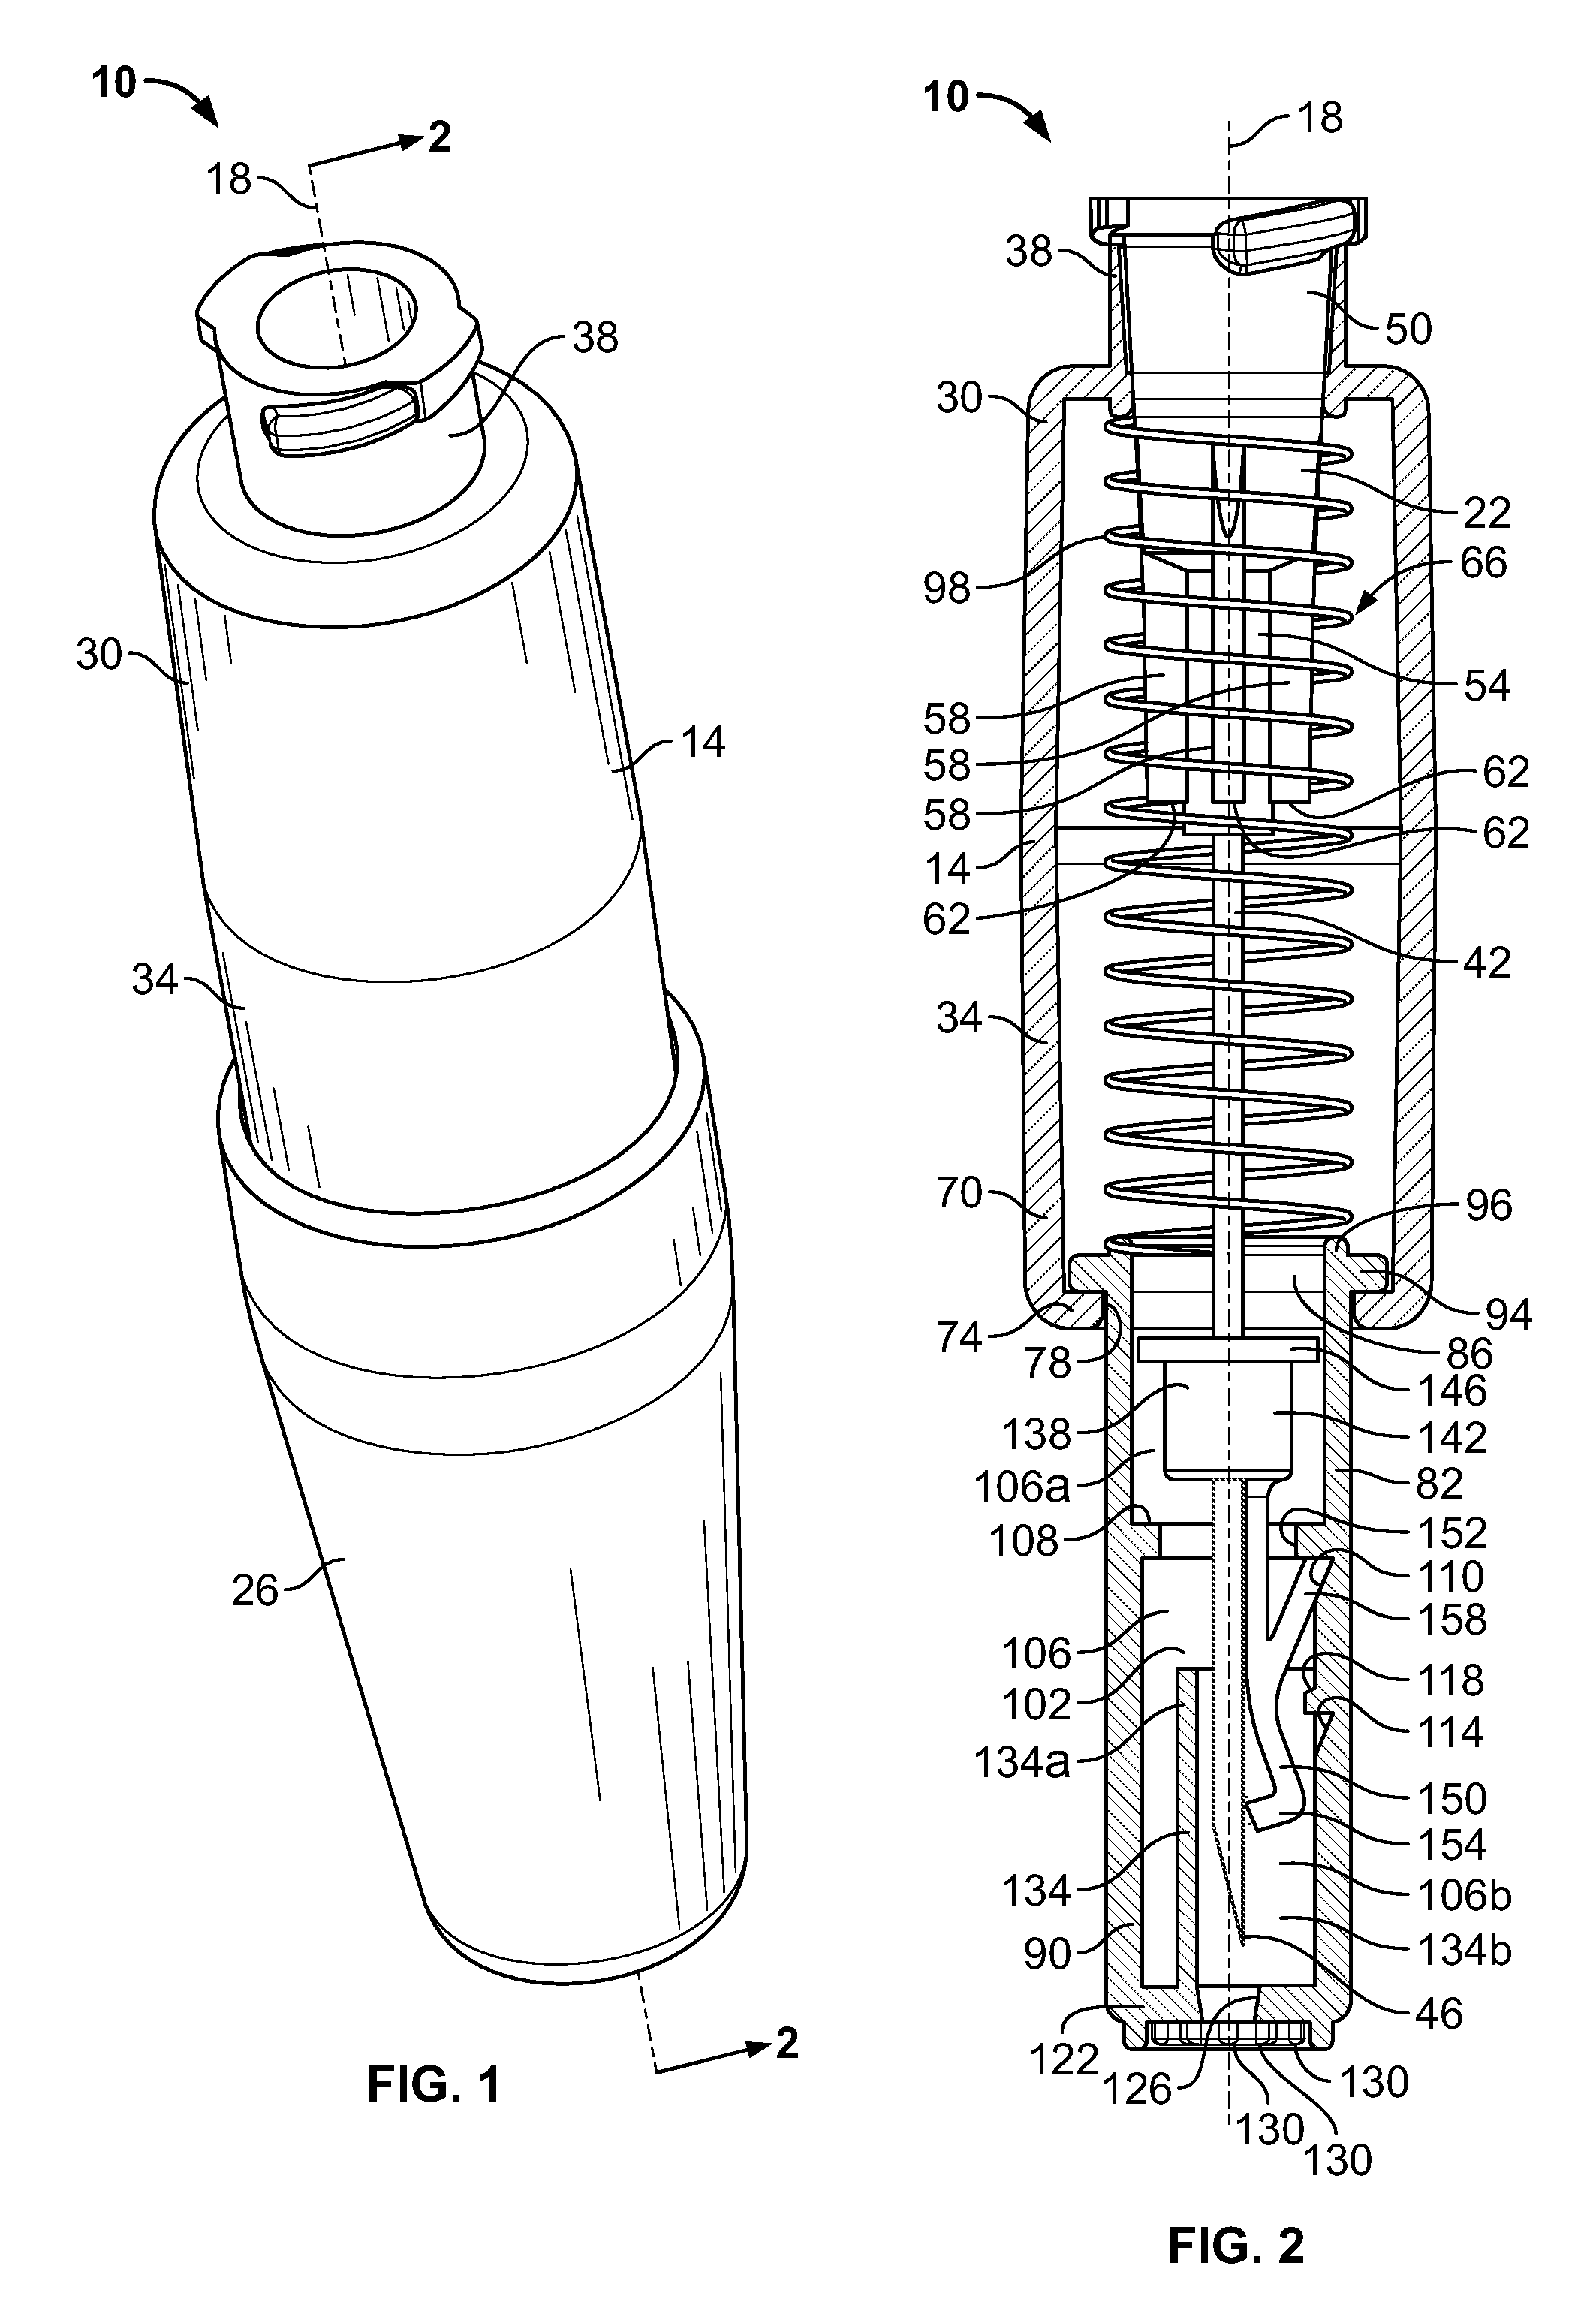 Needle cover assembly for a syringe